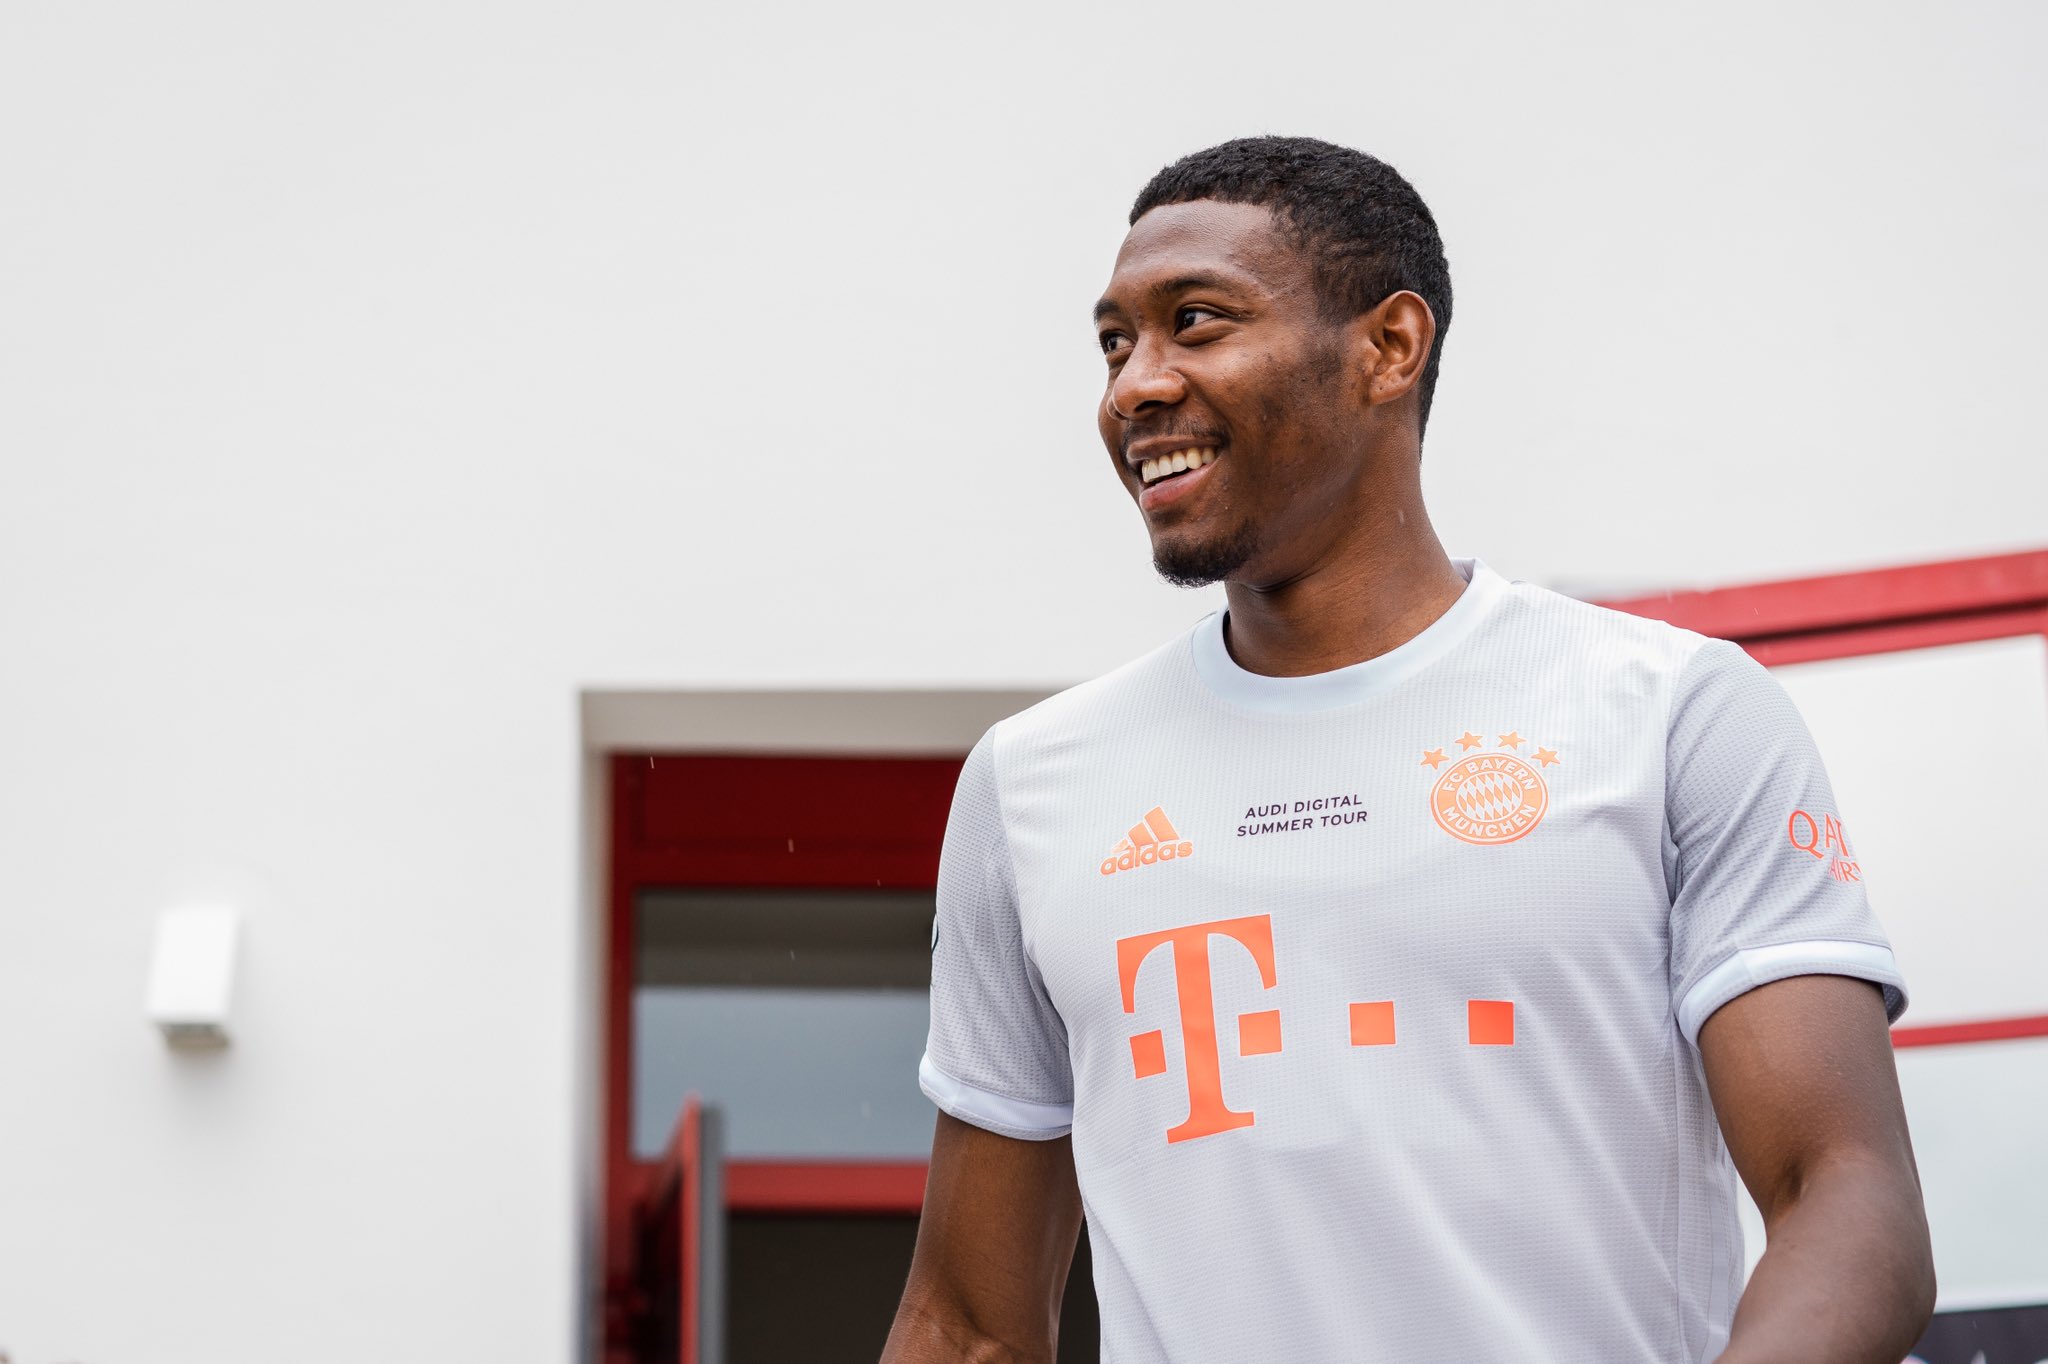 Real Madrid confirm that David Alaba has tested positive for COVID-19